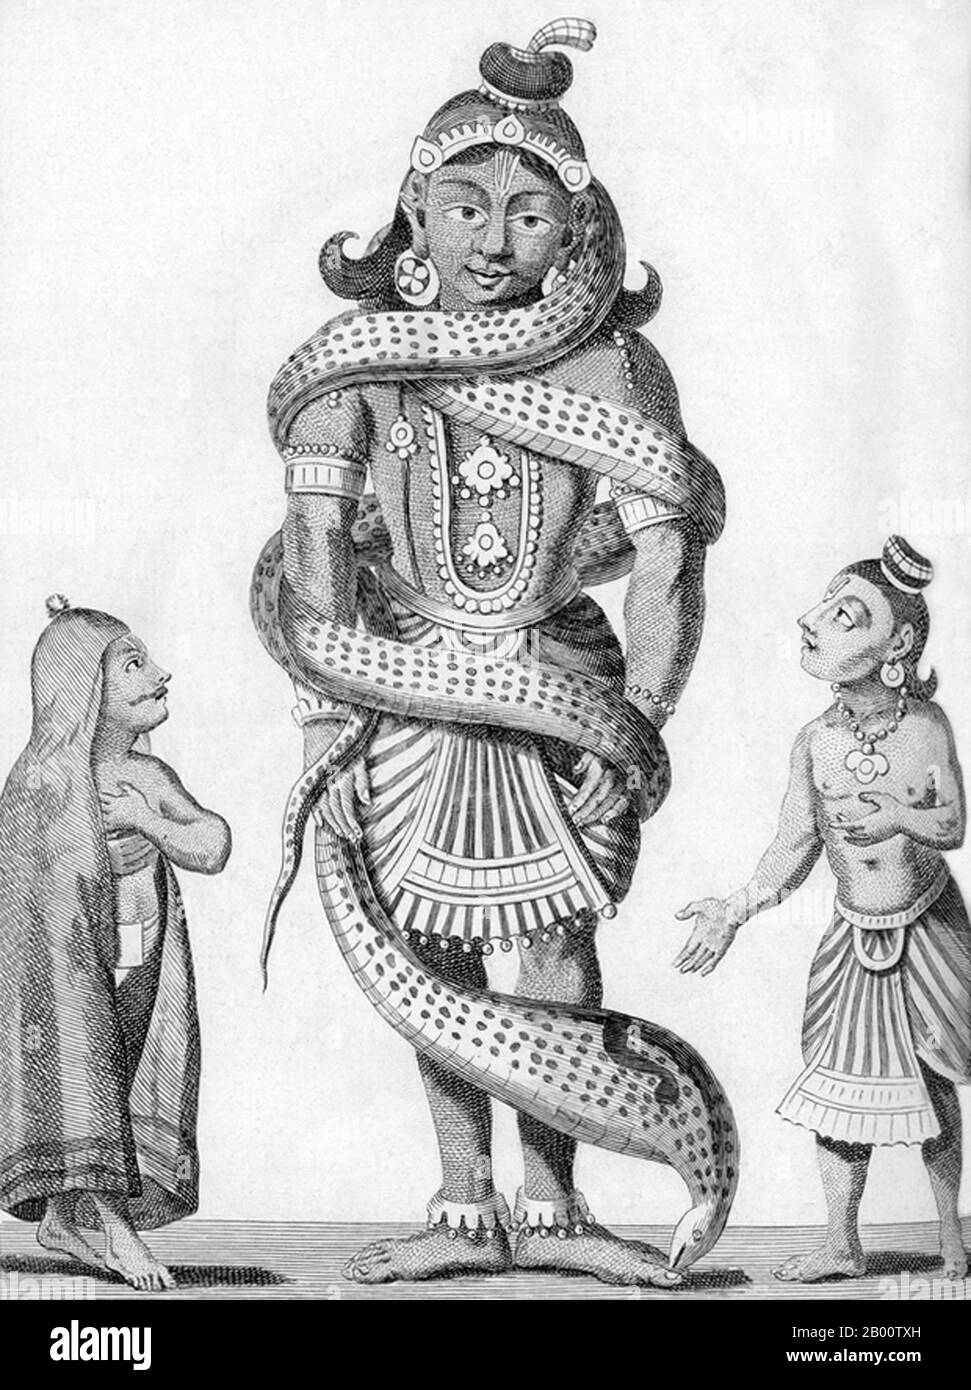 India: 'Krishna Fighting Kalinga (Kaliya) the Serpent. Friends of Krishna look on in Trepidation'. Illustration by Pierre Sonnerat (1748-1814), 1782.  Pierre Sonnerat (1748-1814) was a French naturalist and explorer who made several voyages to southeast Asia between 1769 and 1781. He published this two-volume account of his voyage of 1774-81 in 1782.  Volume 1 deals exclusively with India, whose culture Sonnerat very much admired, and is especially noteworthy for its extended discussion of religion in India, Hinduism in particular. The book contains engravings based on Sonnerat's drawings. Stock Photo